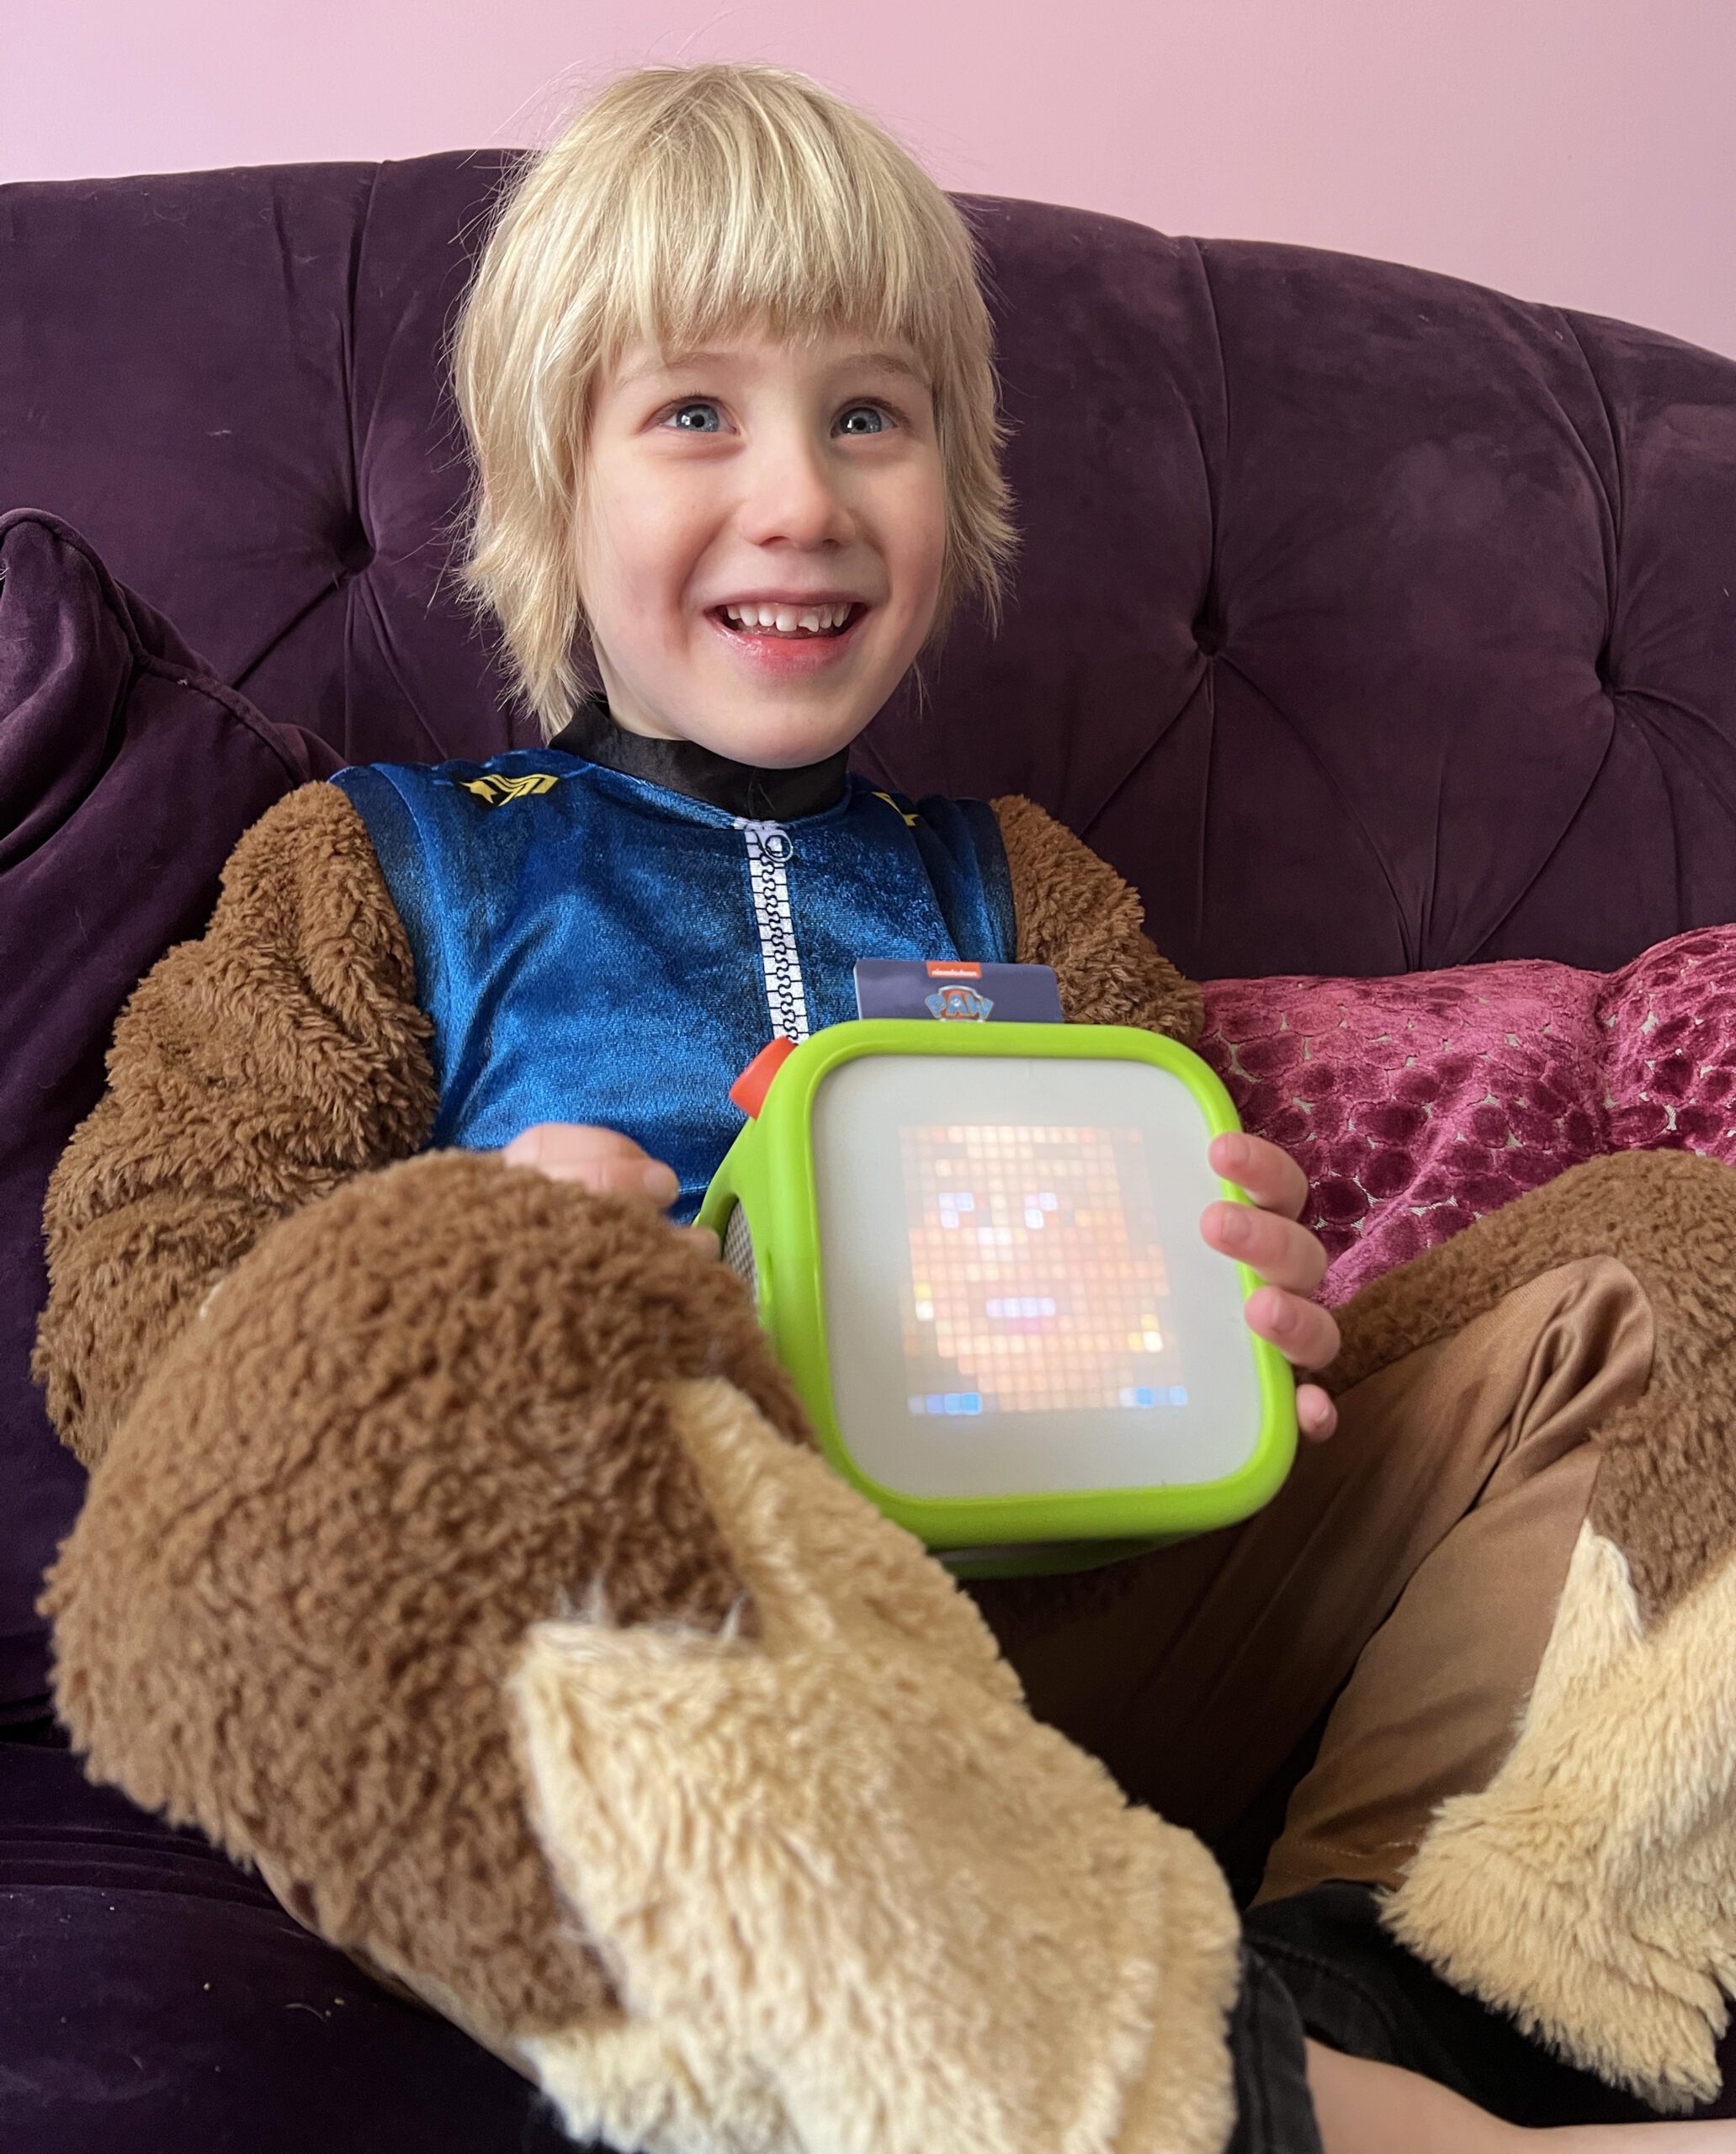 Yoto Player Children's Audio Player Review - Laura Summers